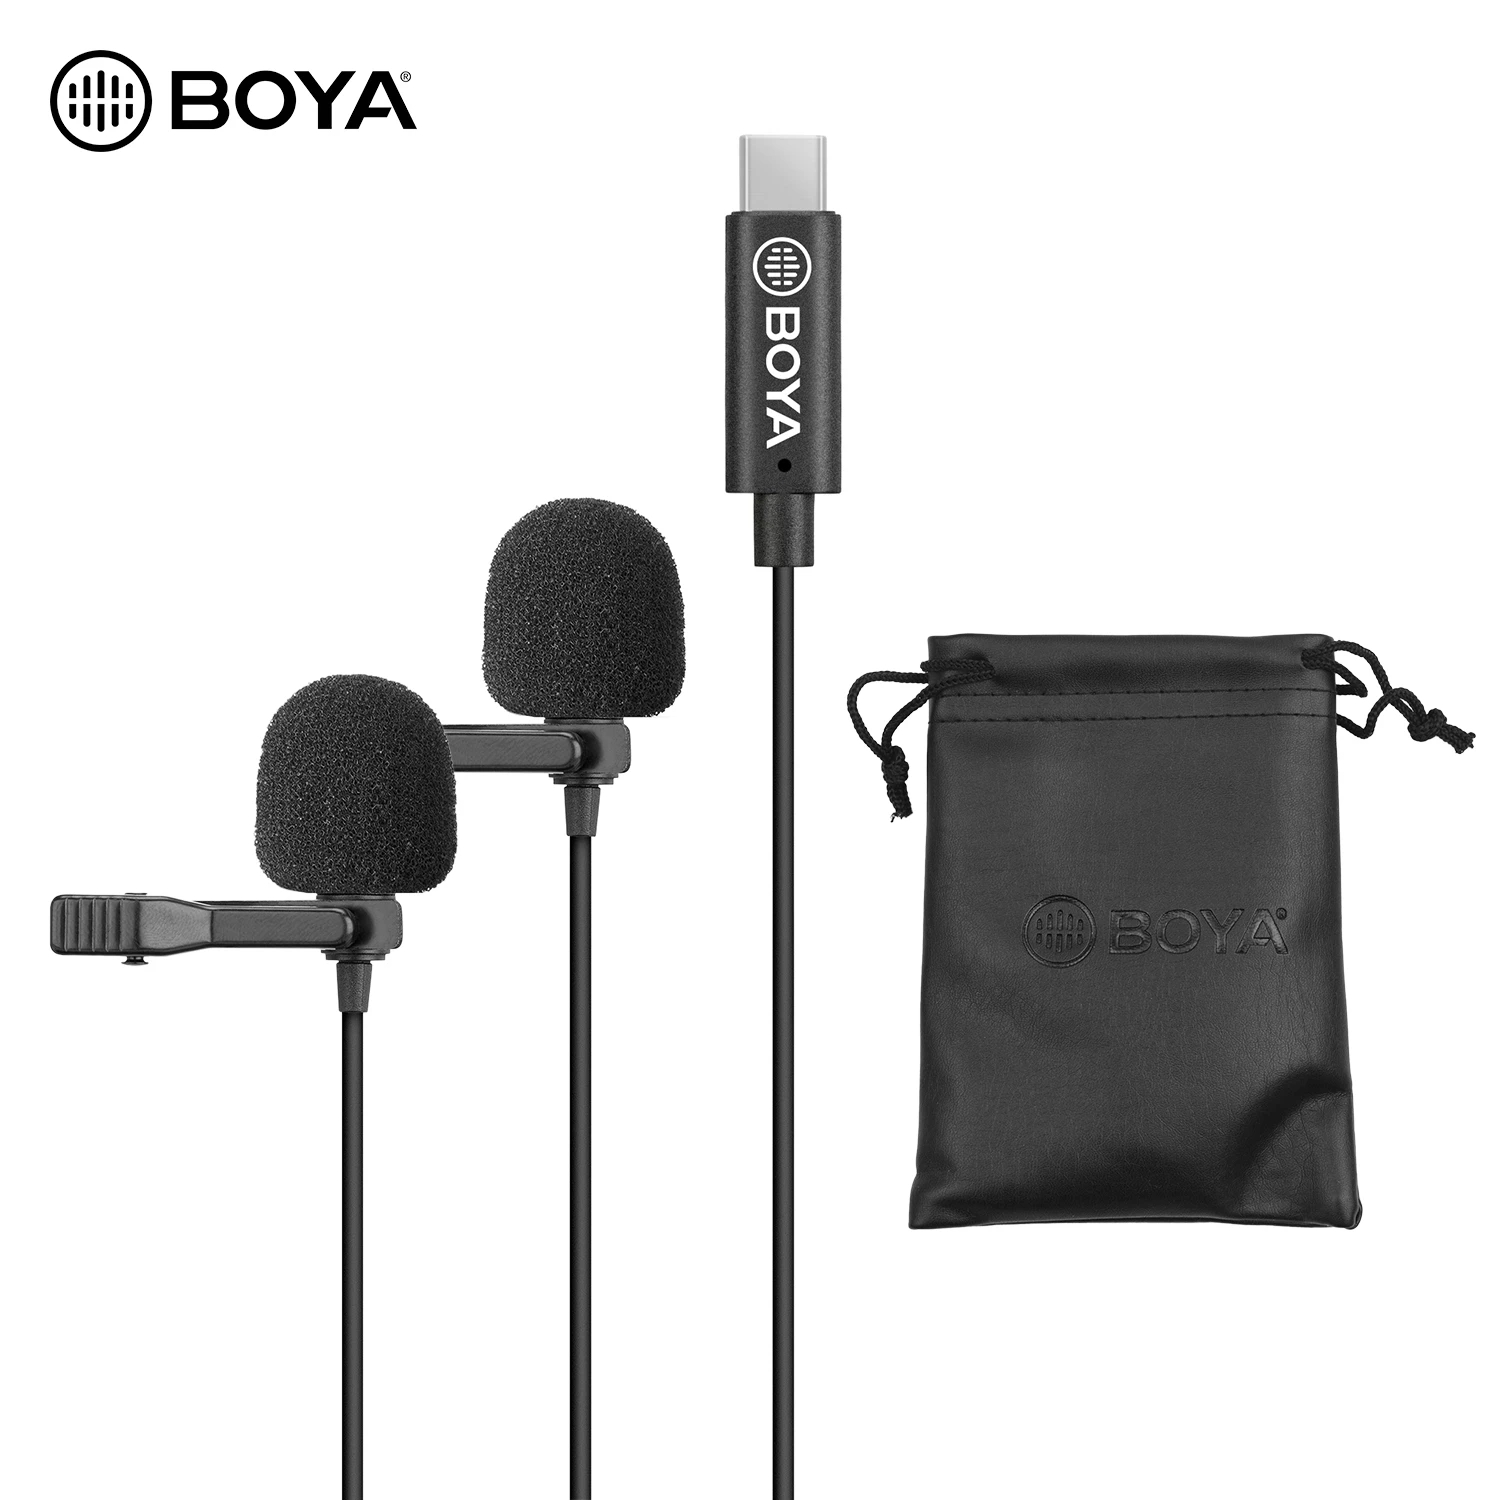 BOYA-BY-M3D-Dual-Lavalier-Microphone-Omnidirectional-Digital-Clip-on-Lapel-Collar-Mic-for-USB-Type-C-1789153-10